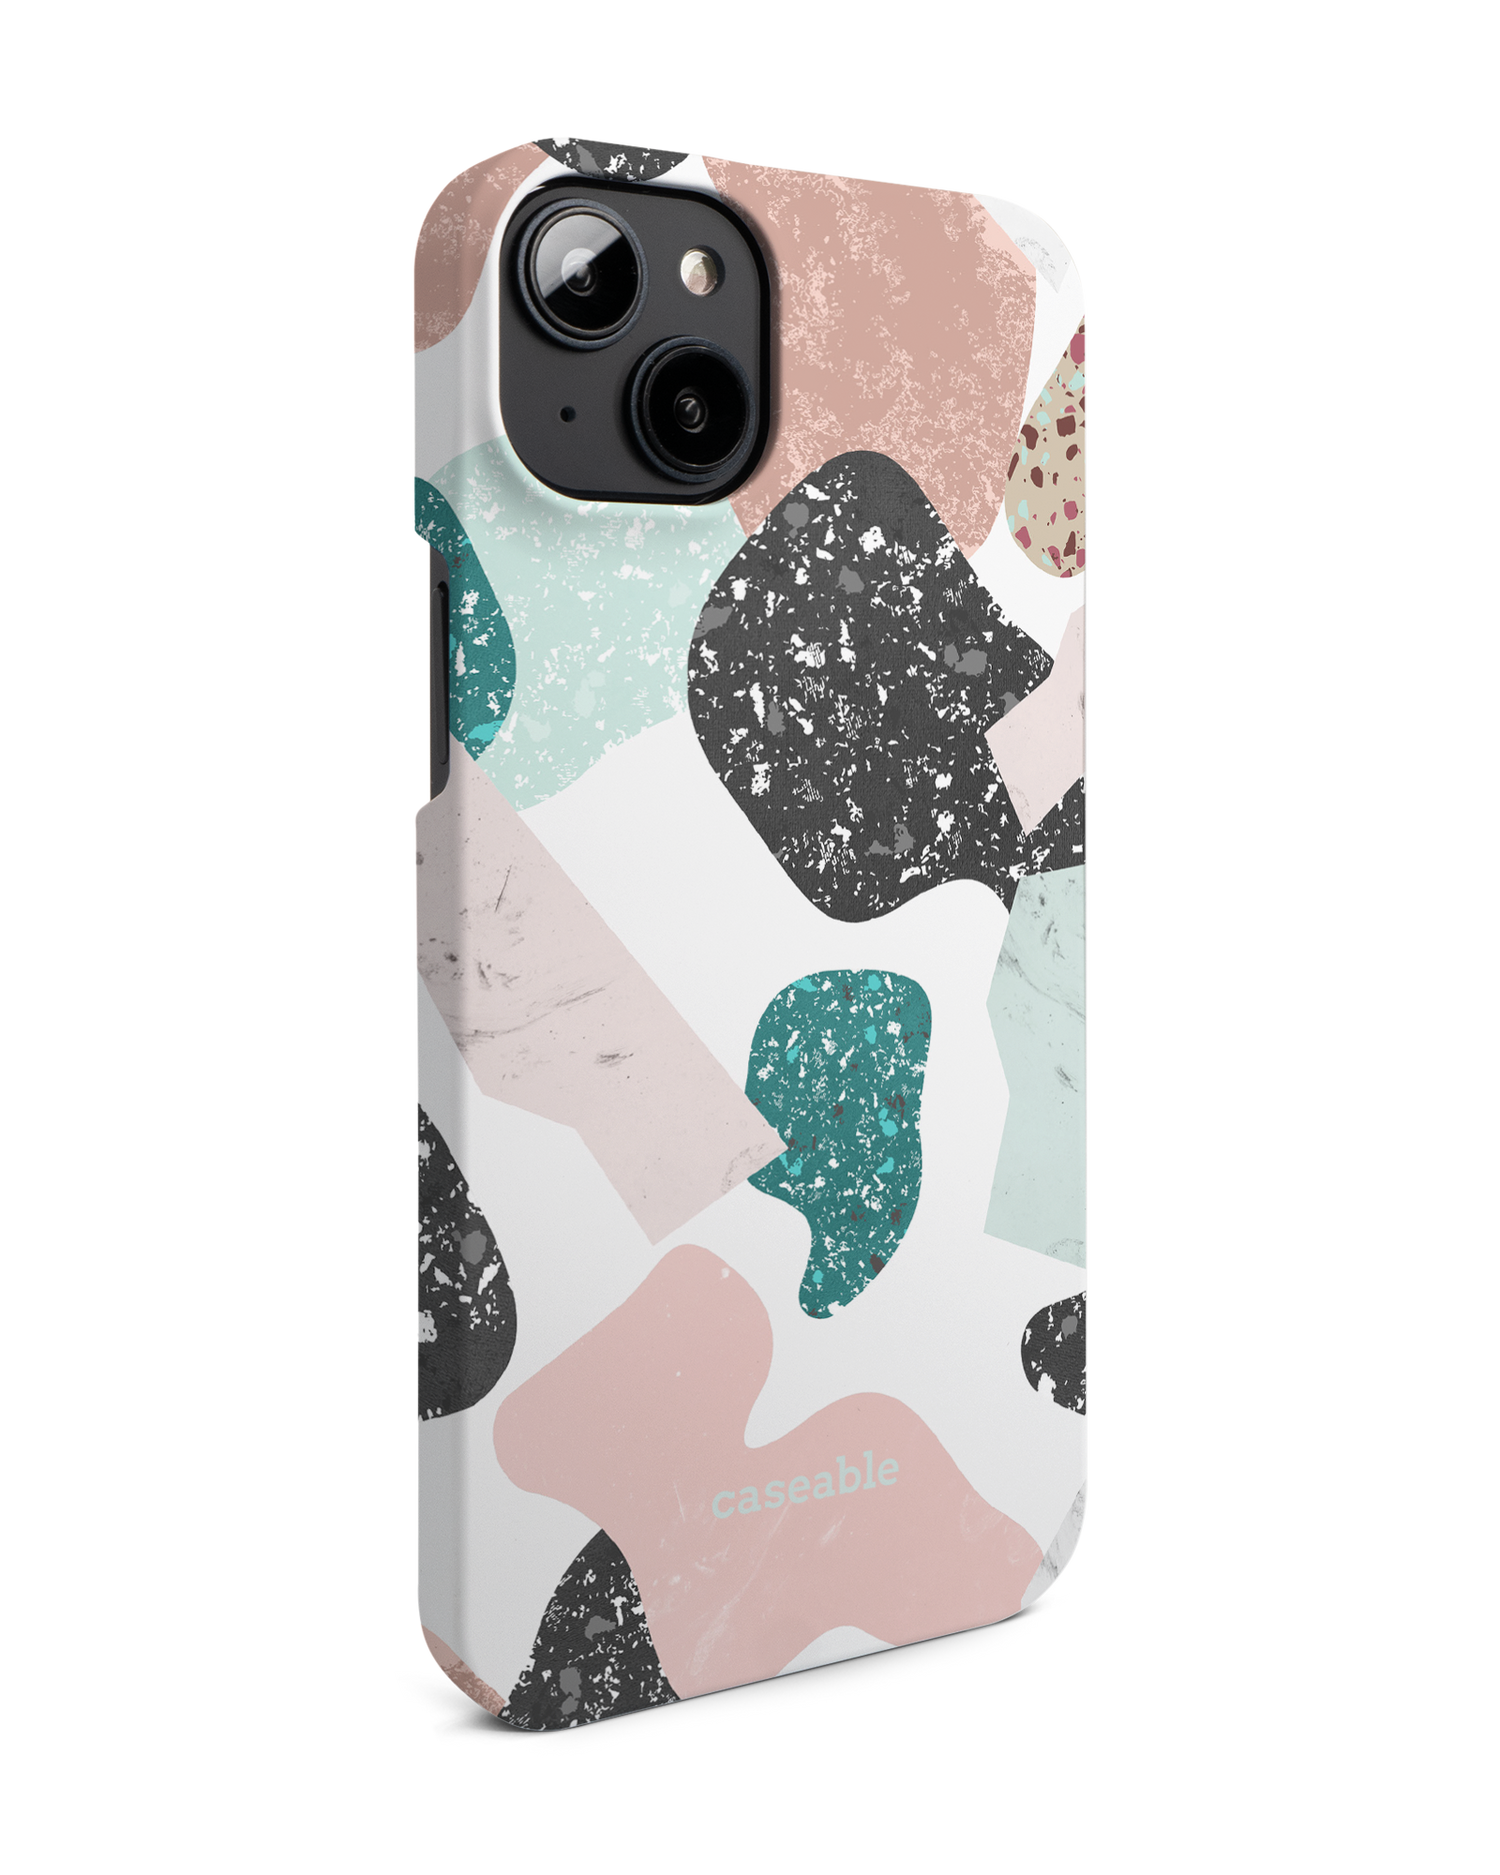 Scattered Shapes Hard Shell Phone Case for Apple iPhone 14 Plus: View from the left side